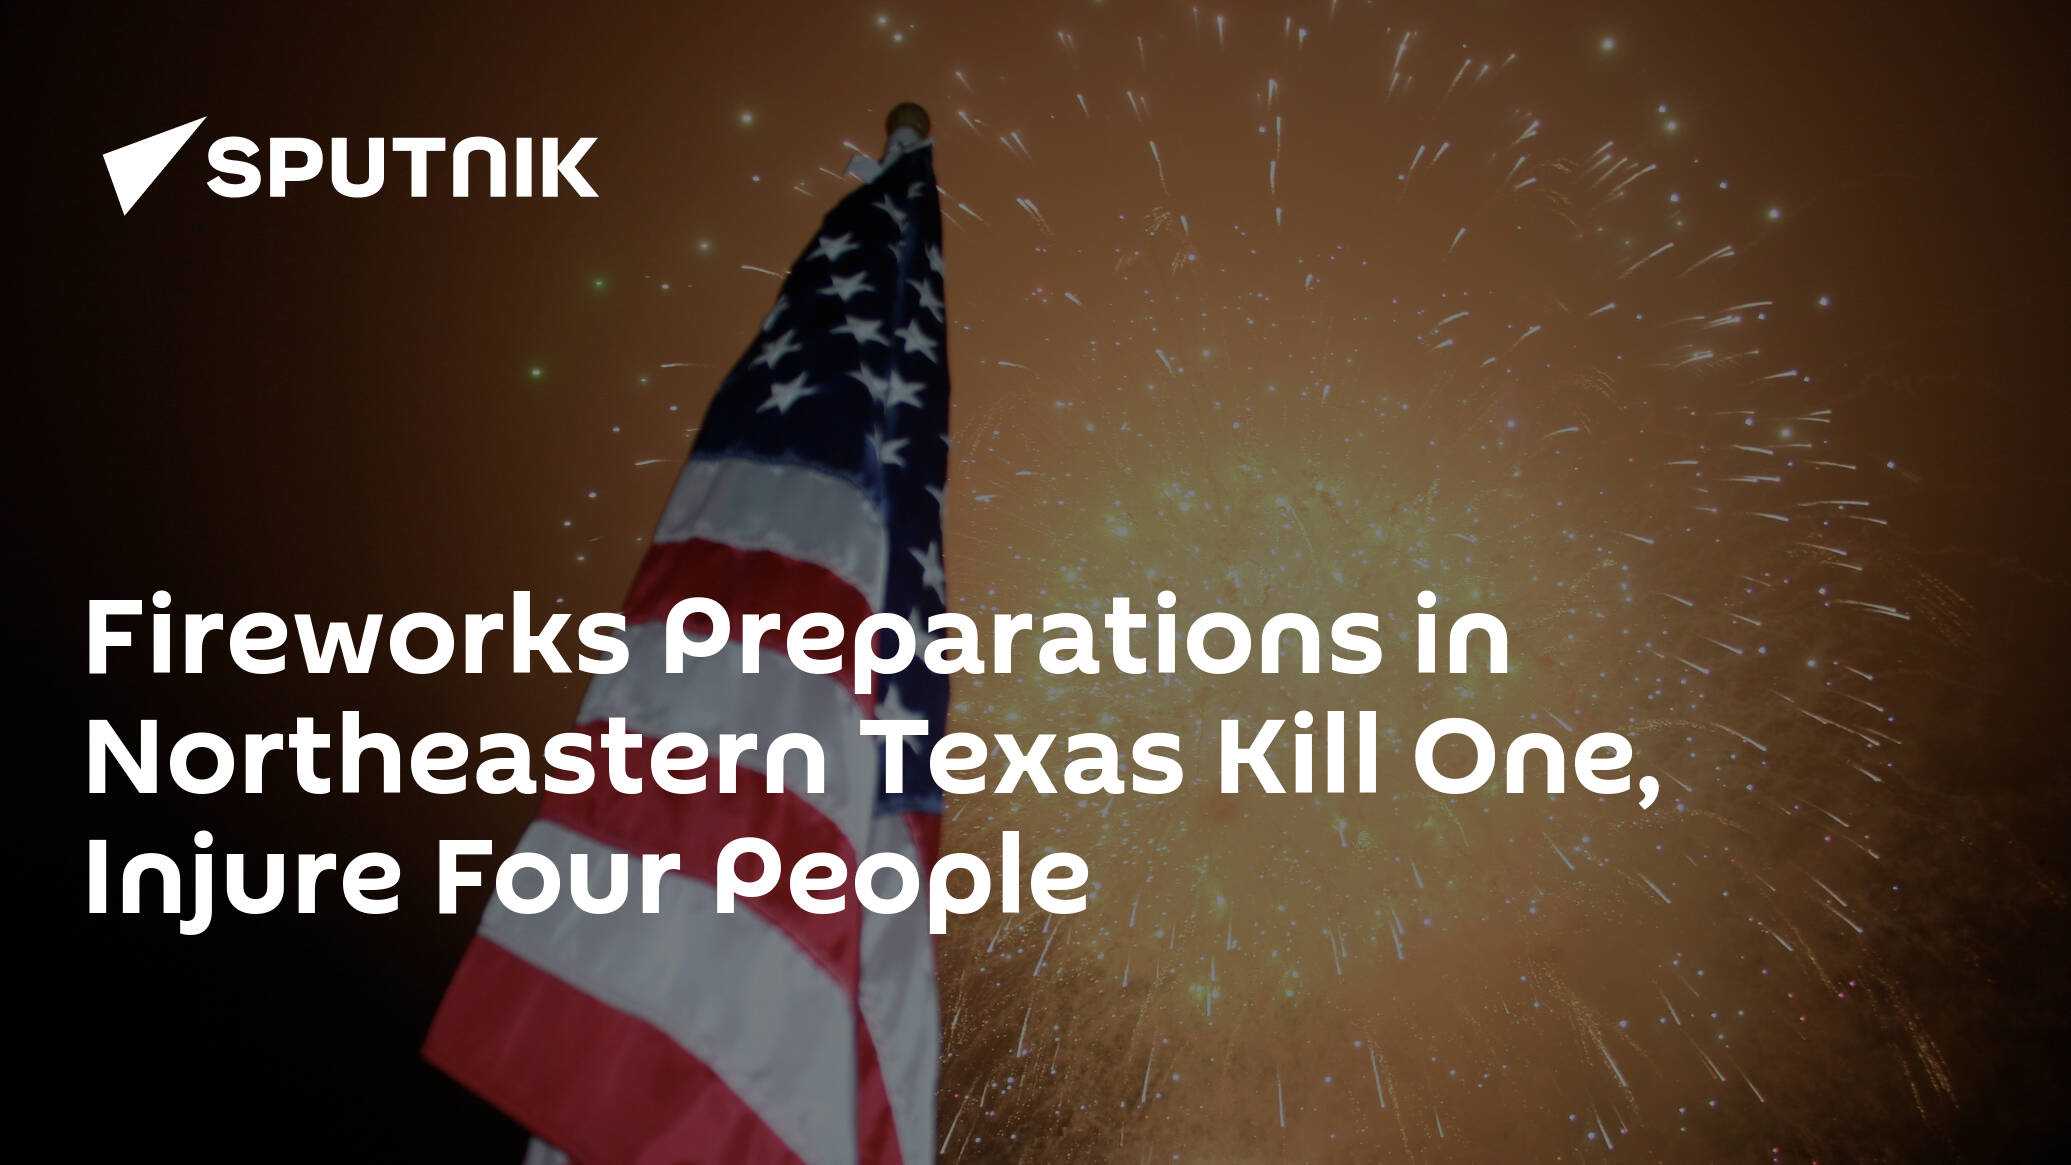 Fireworks Preparations in Northeastern Texas Kill One, Injure Four People